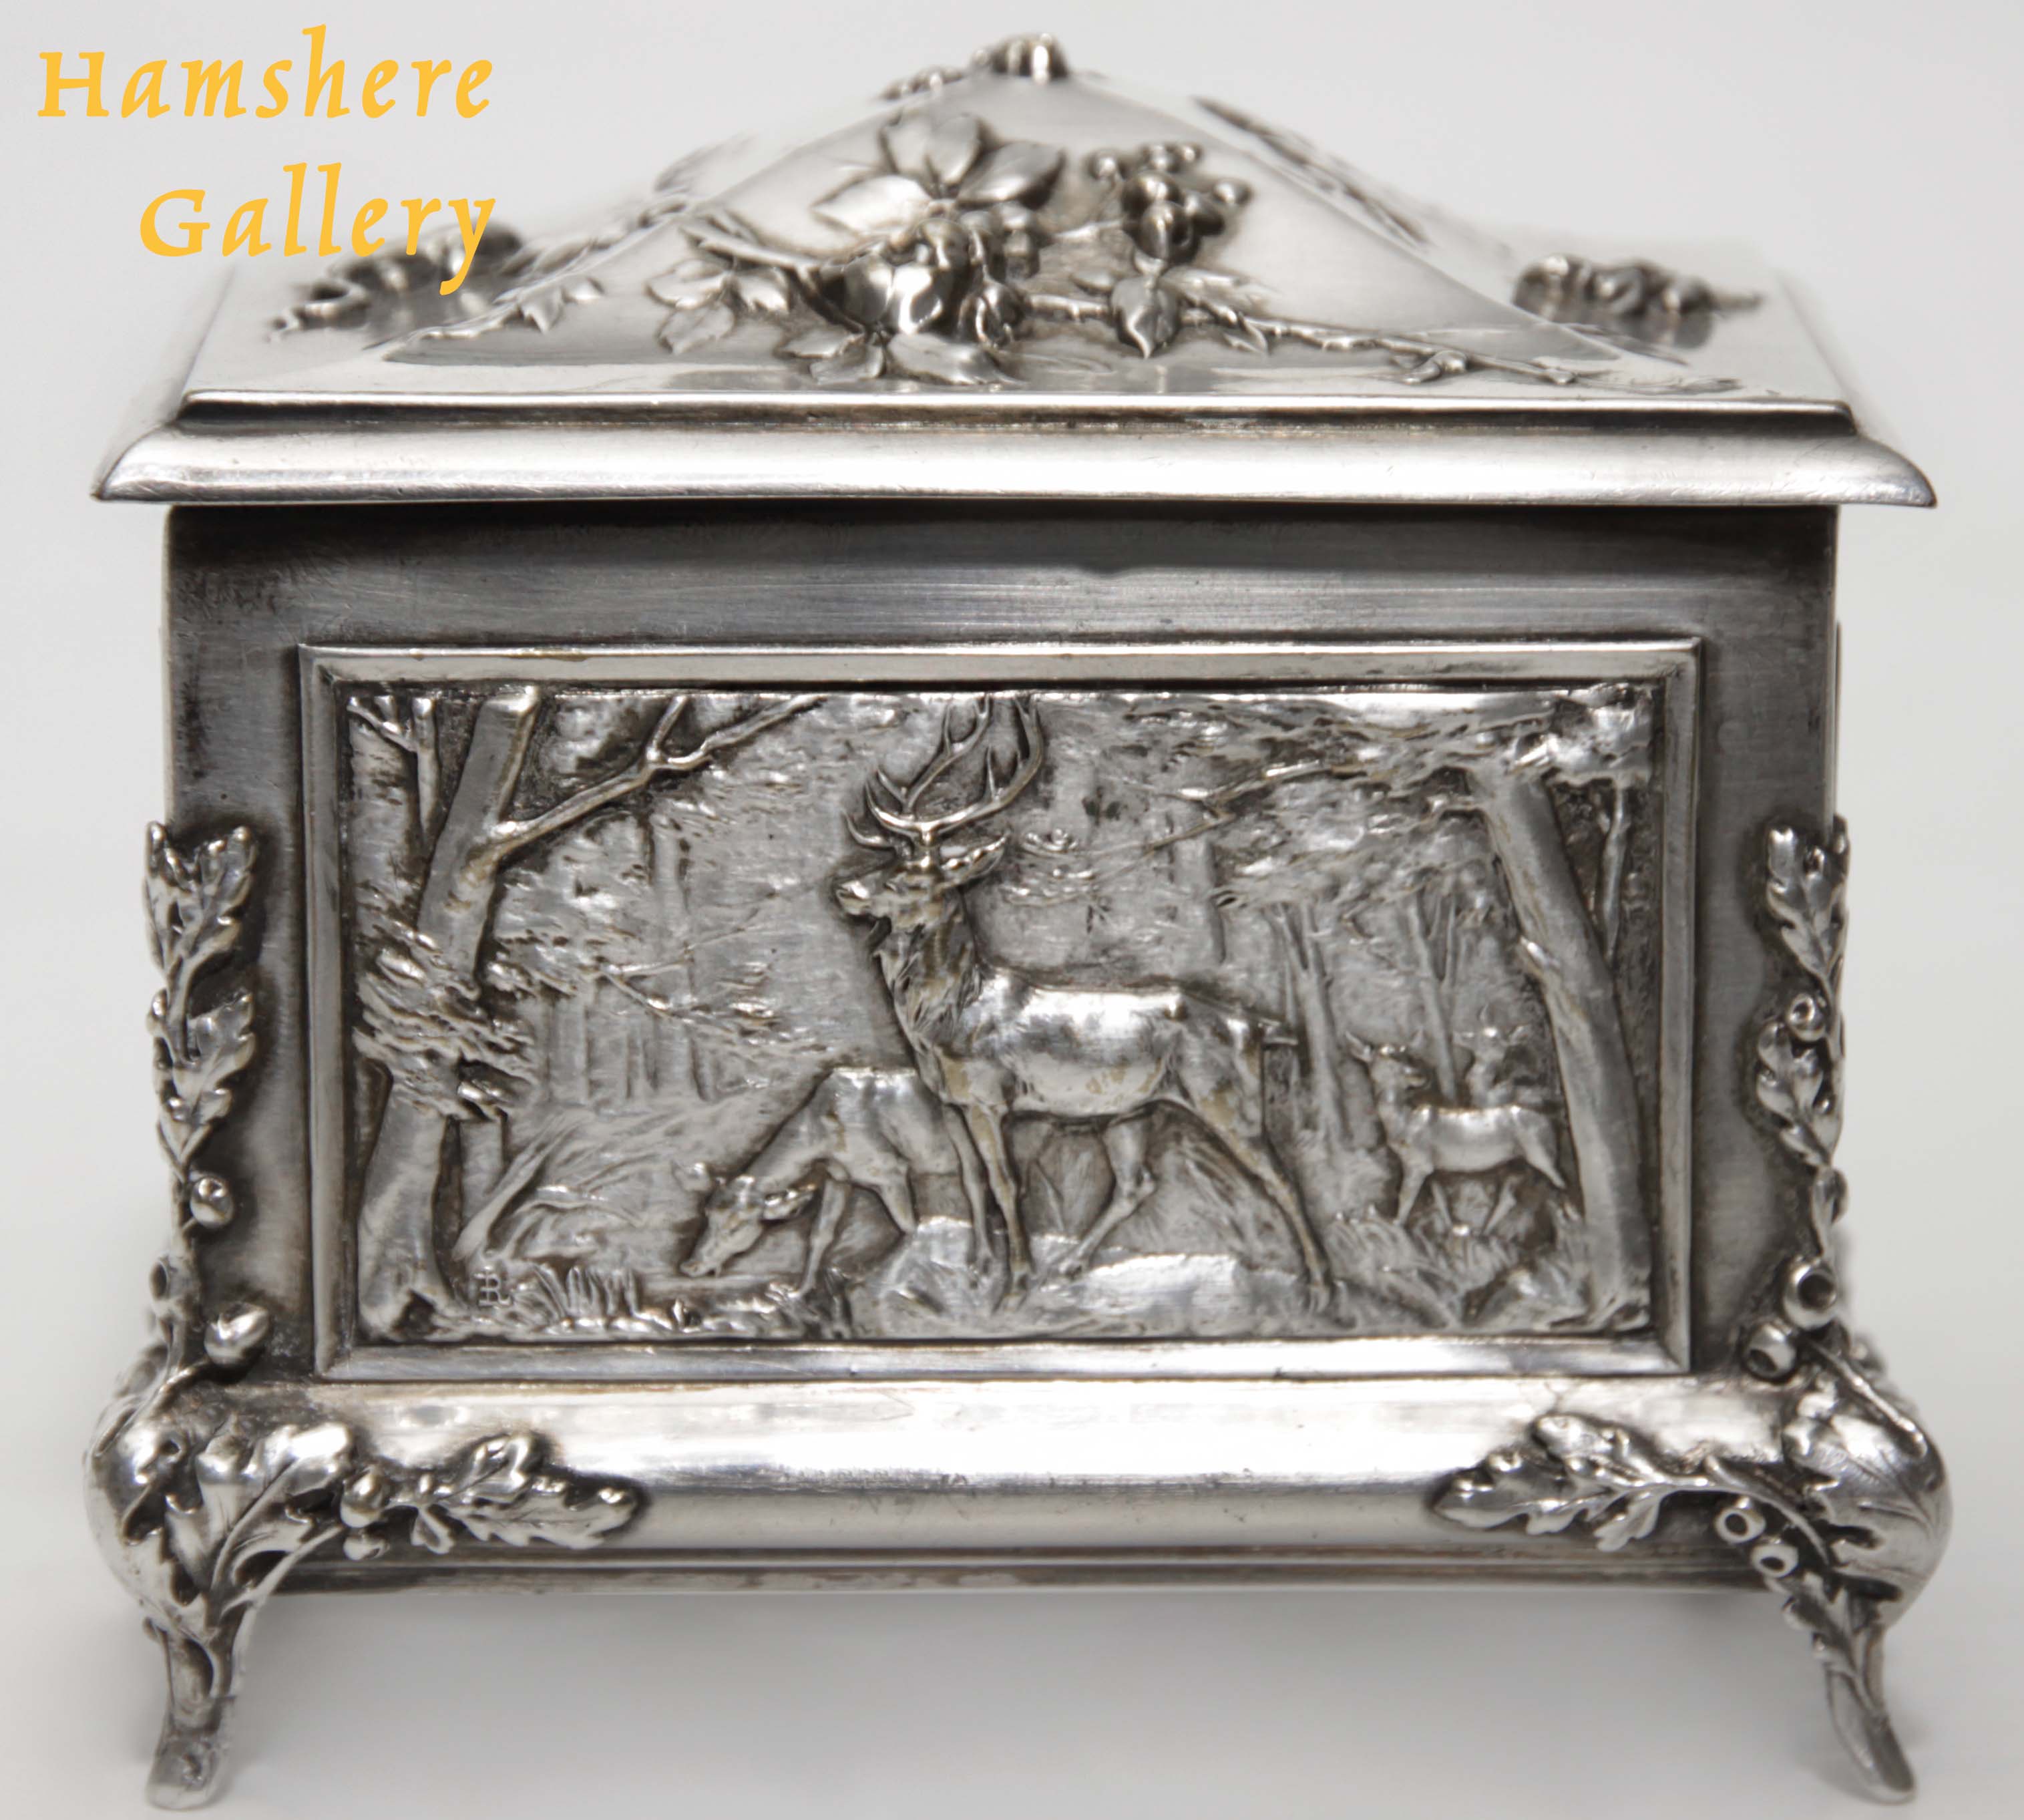 Click for larger image: A silver hunting / La Chasse jewellery box by Louis Armand Rault (French, 1847-1903) - A silver hunting / La Chasse jewellery box by Louis Armand Rault (French, 1847-1903)